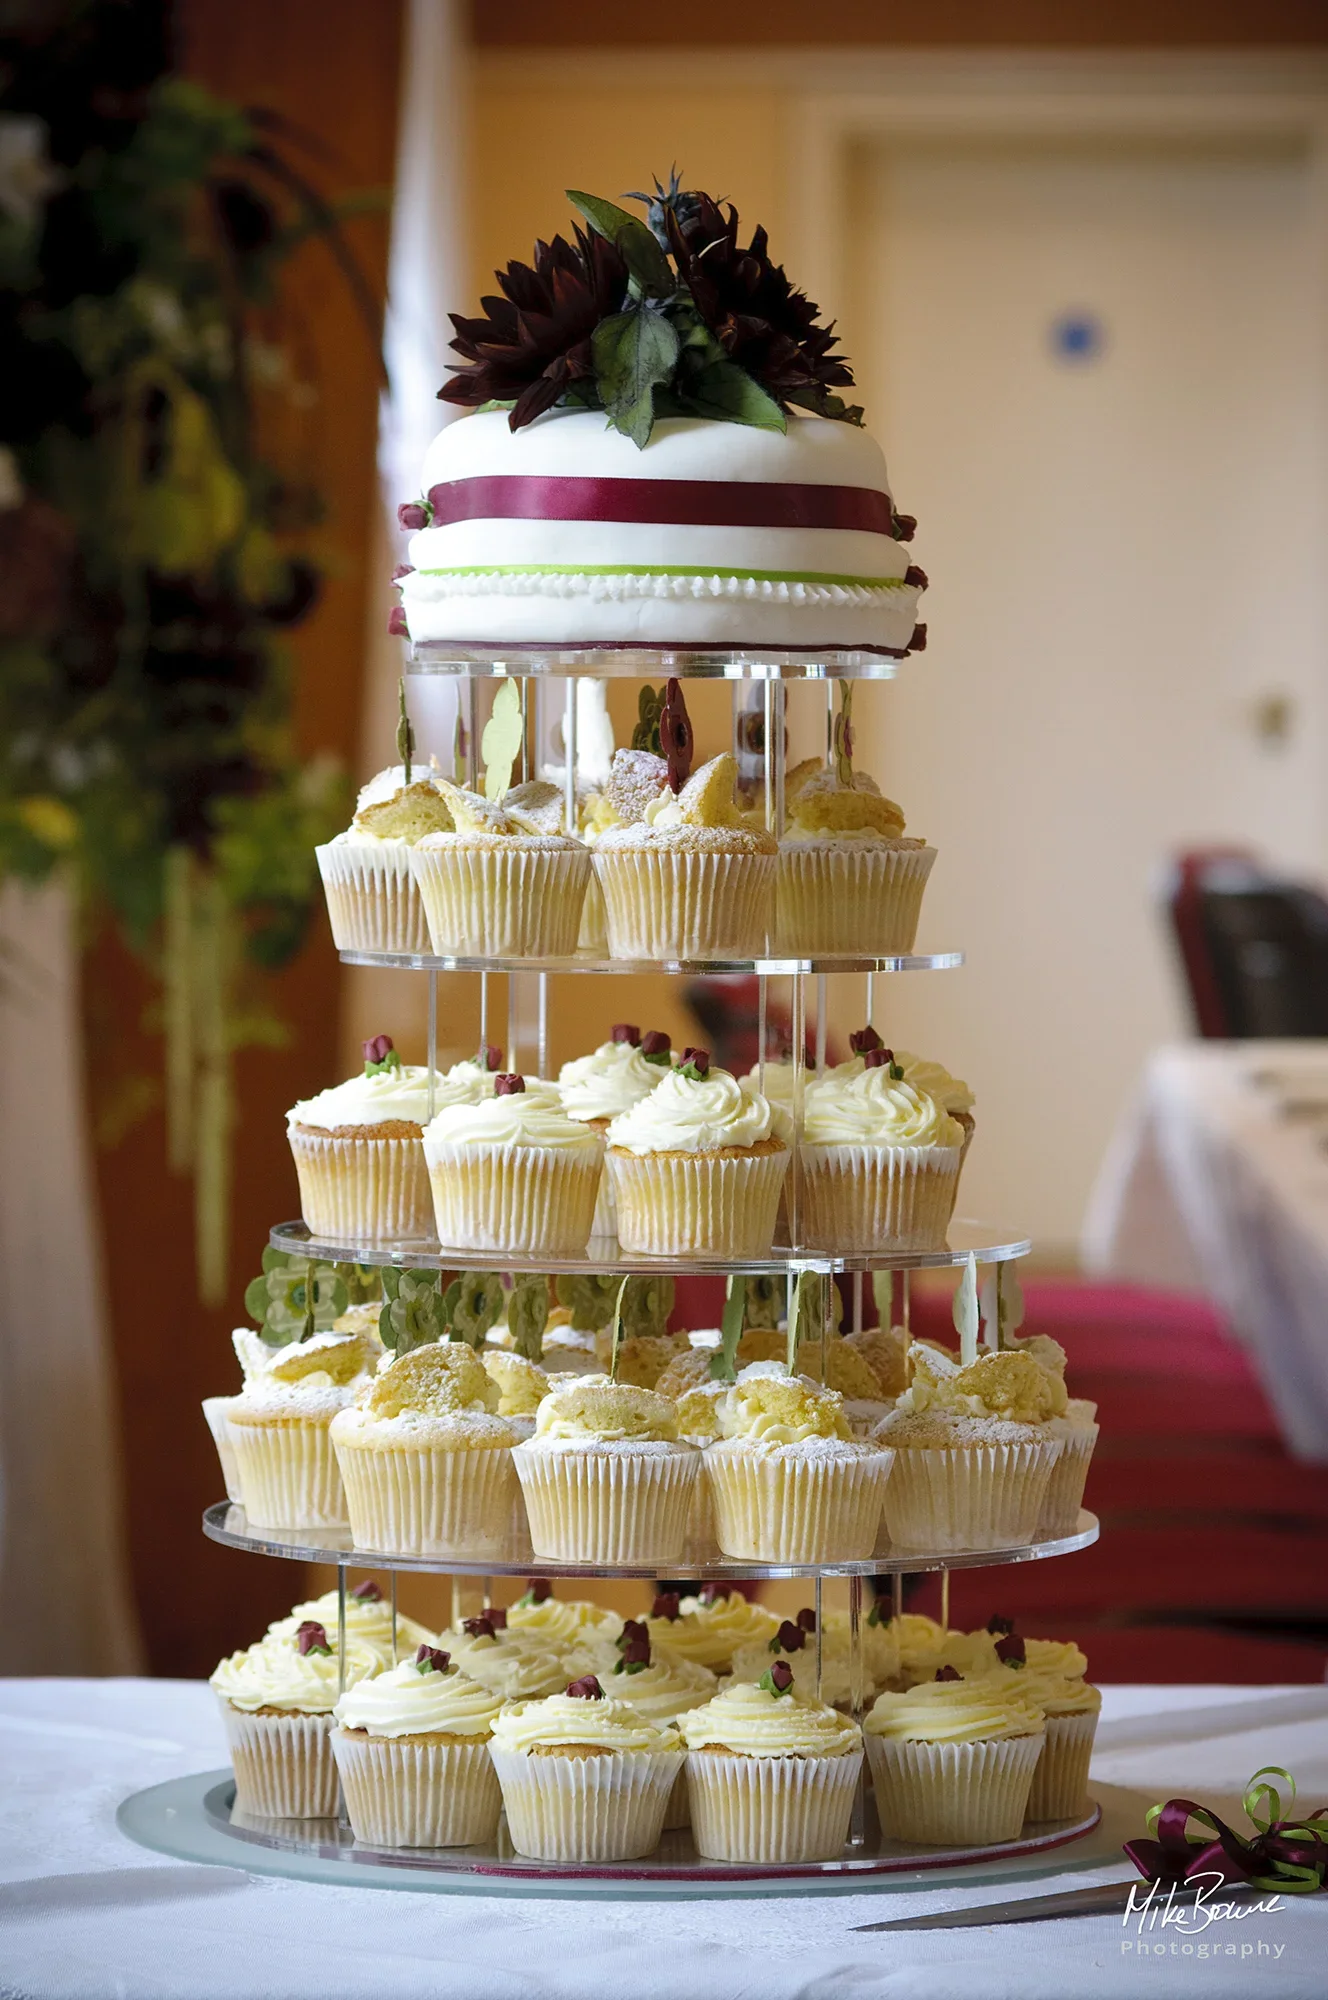 A 5 tiered wedding cake with decorative cupcakes on lower 4 tiers